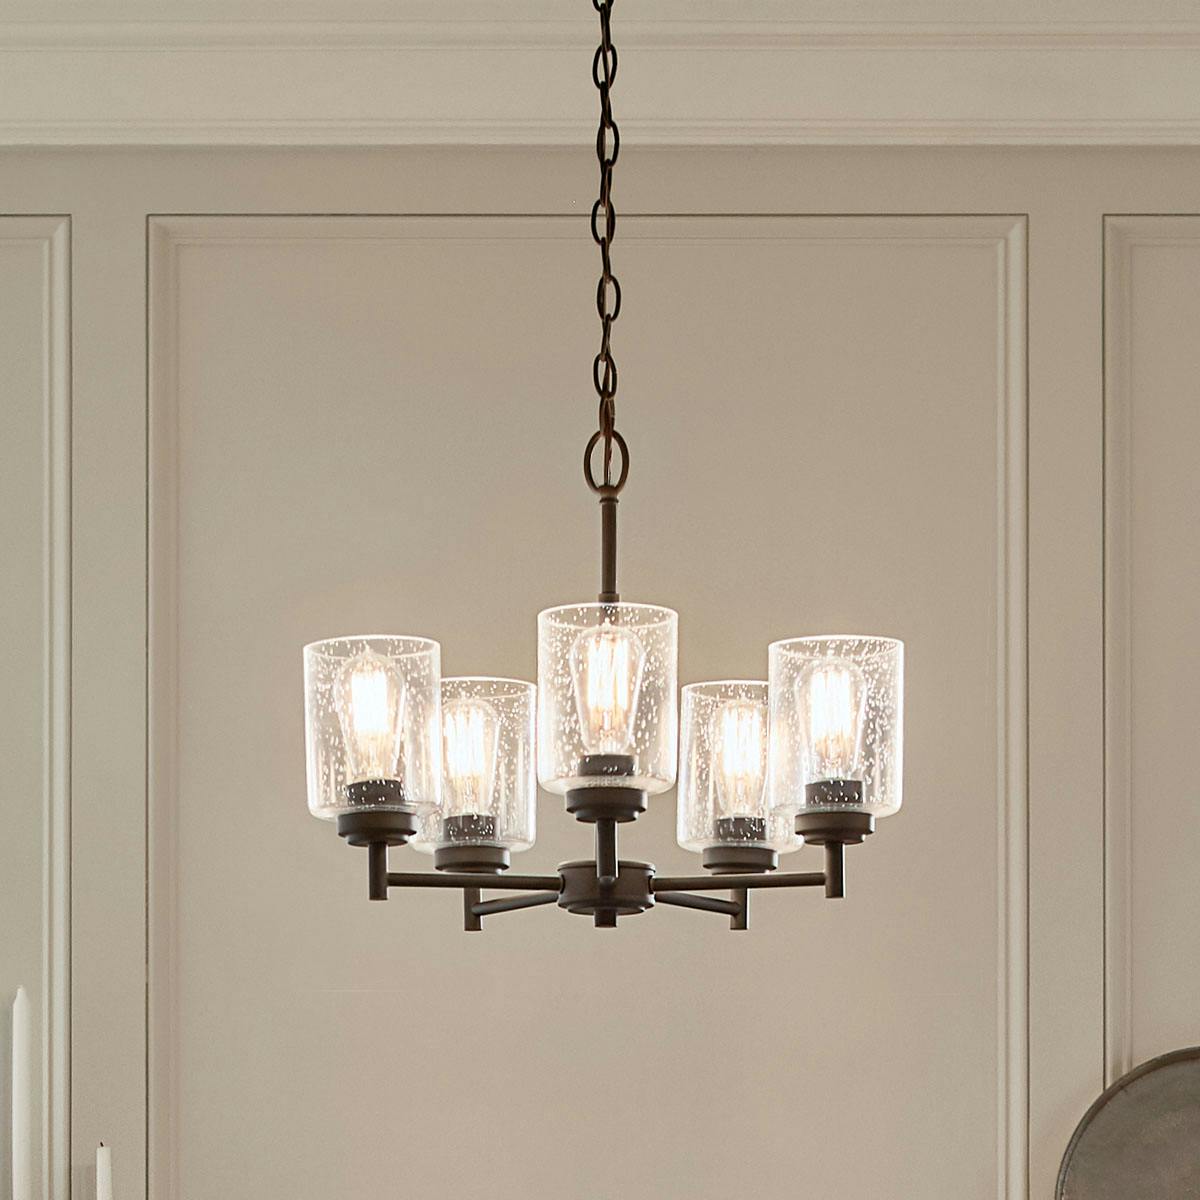 Day time dining room image featuring Winslow chandelier 44030BK